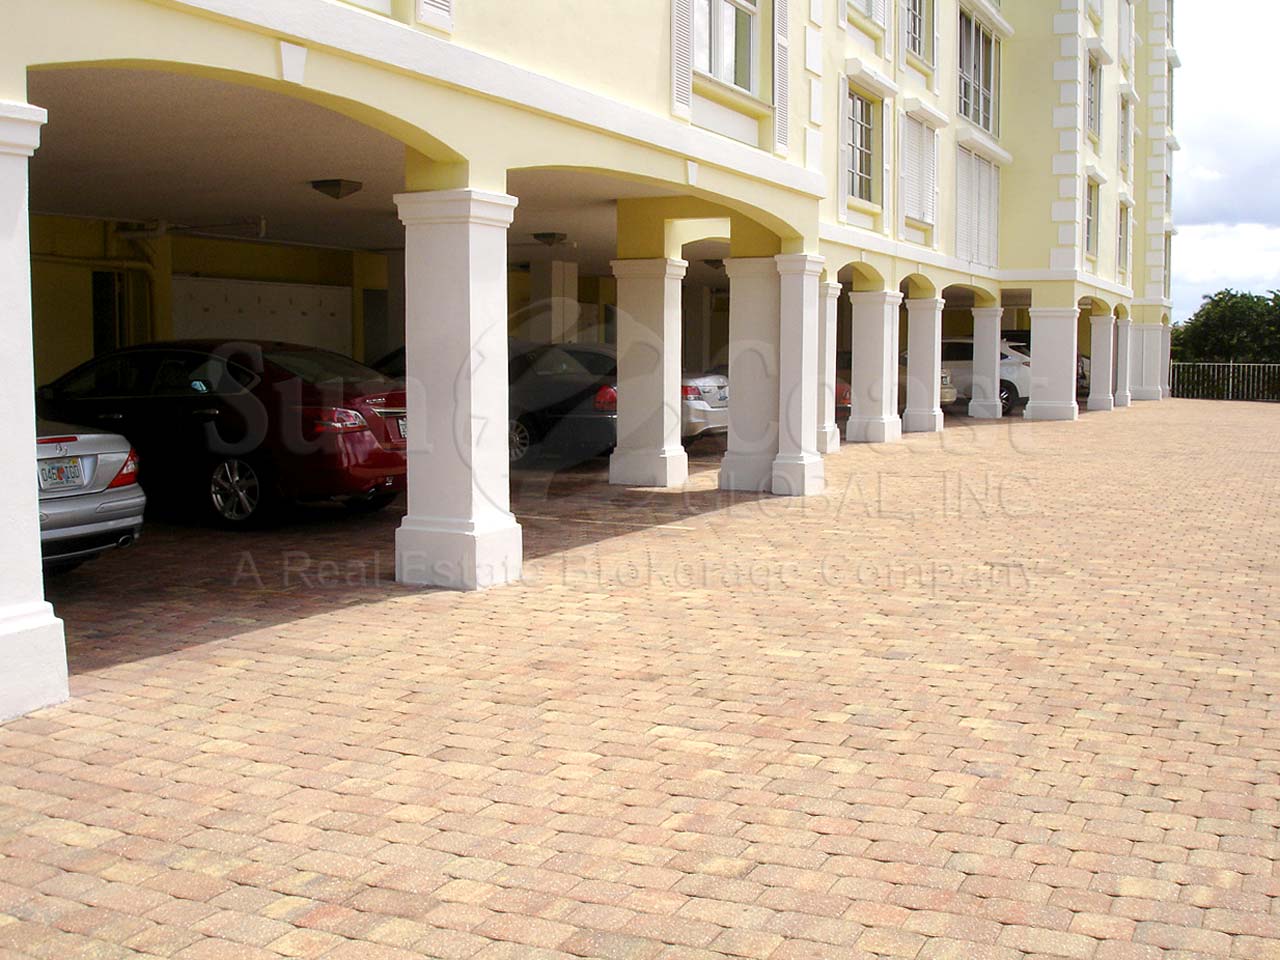 Boulevard Club Covered Parking